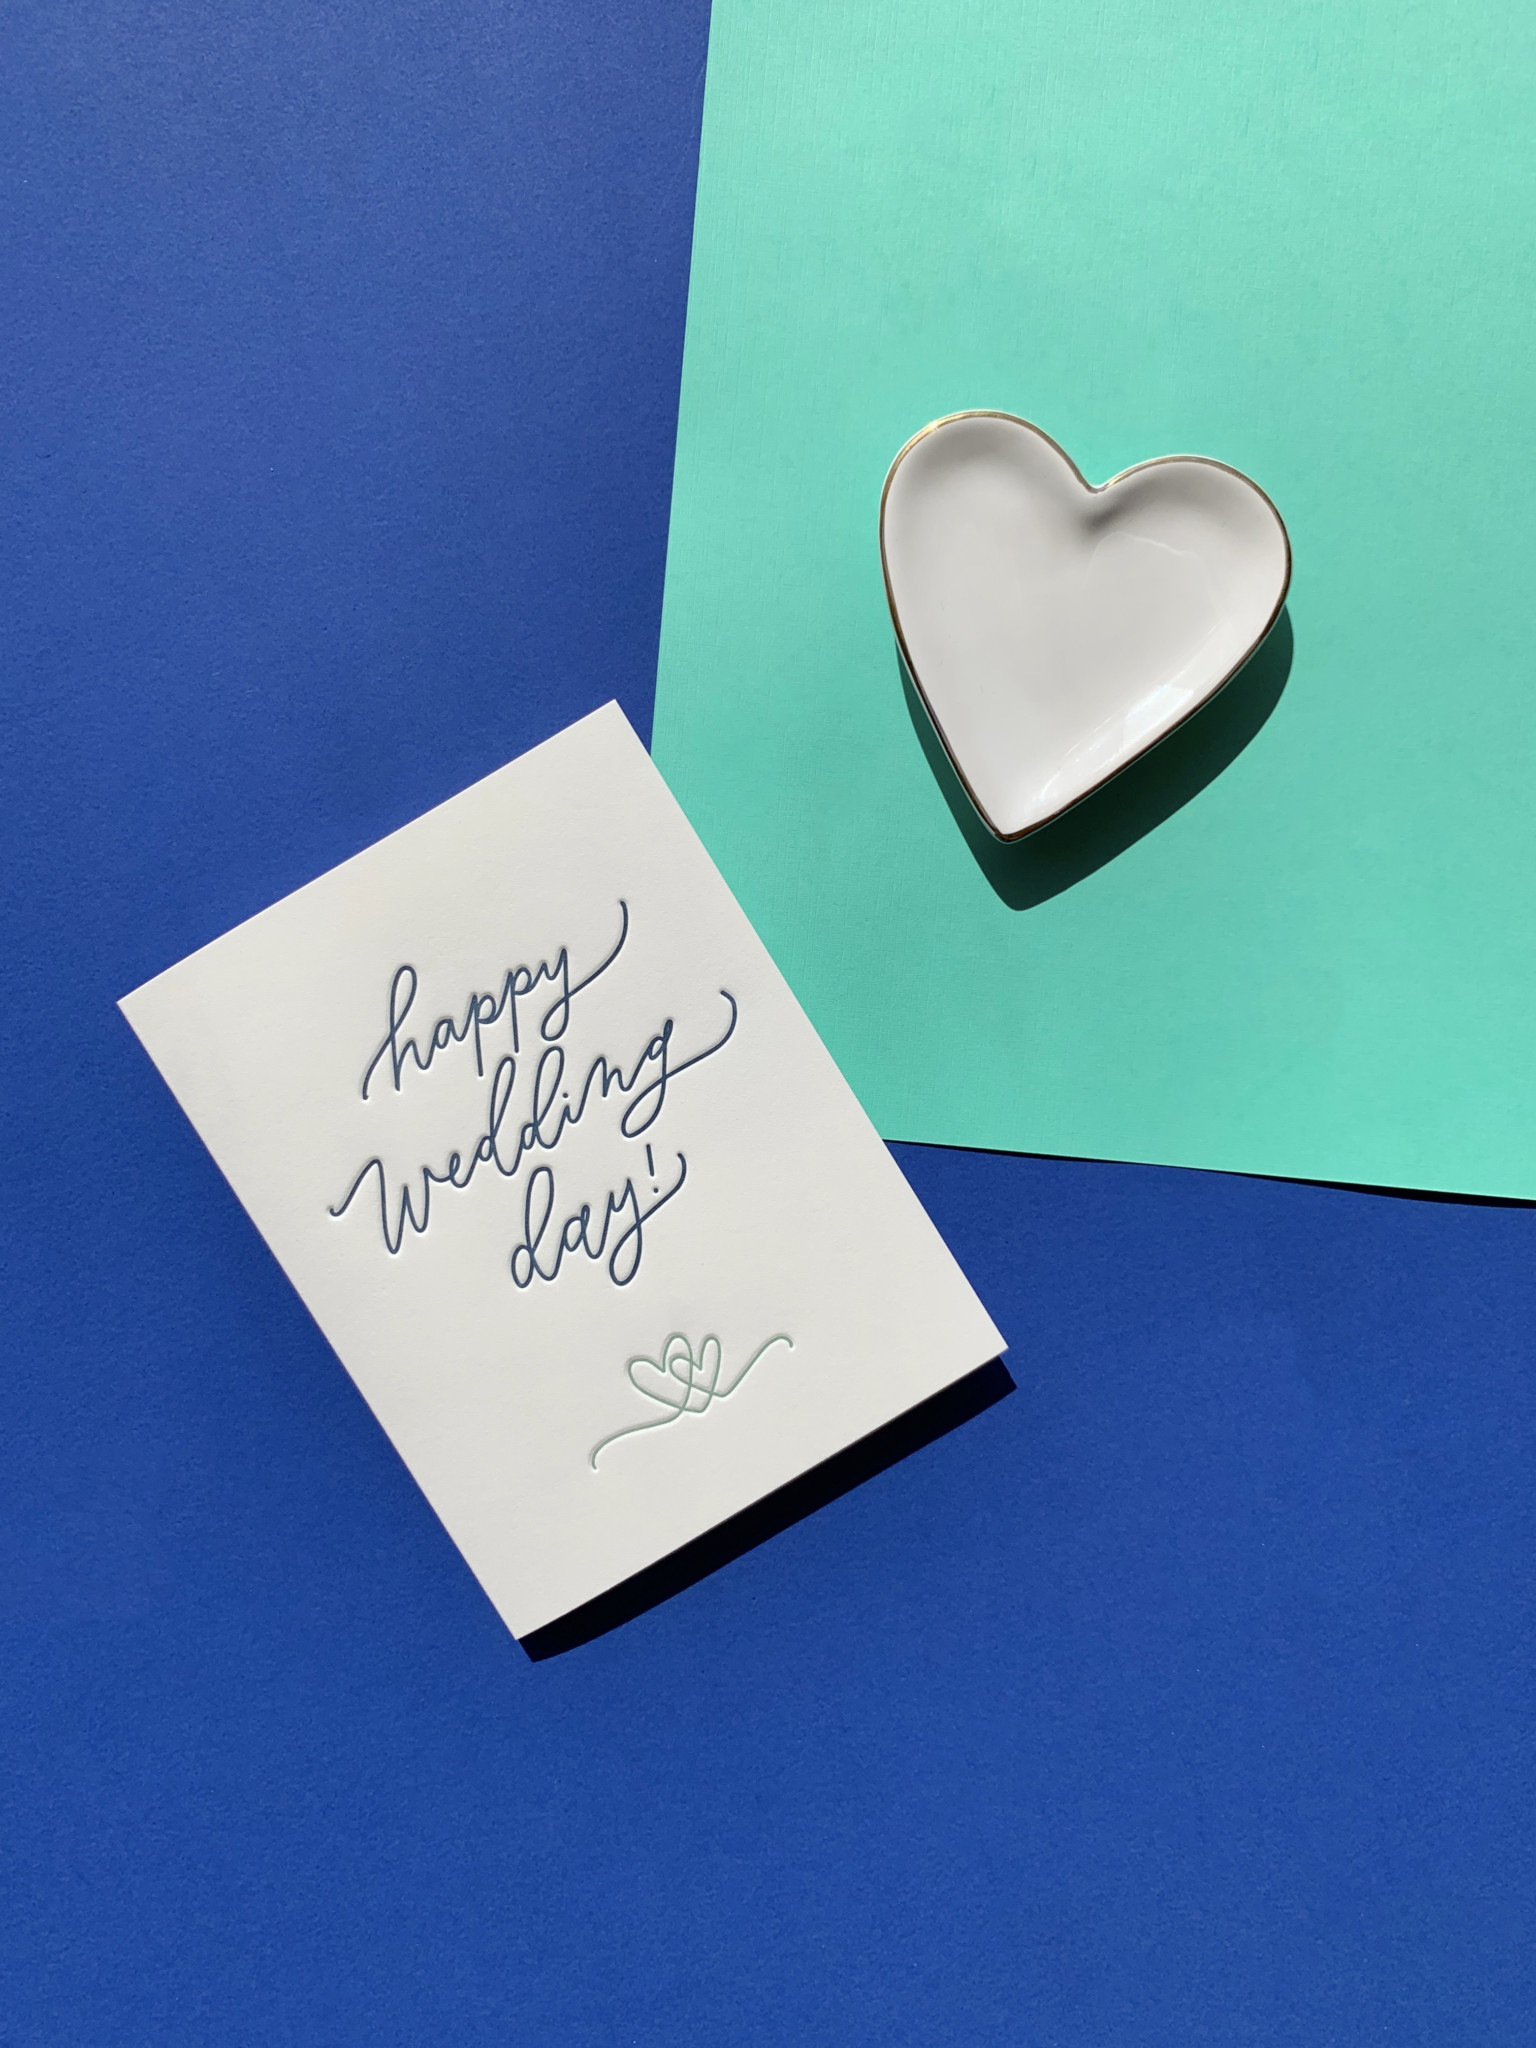 Wedding letterpress greeting card on layered paper background with heart ceramic dish accent